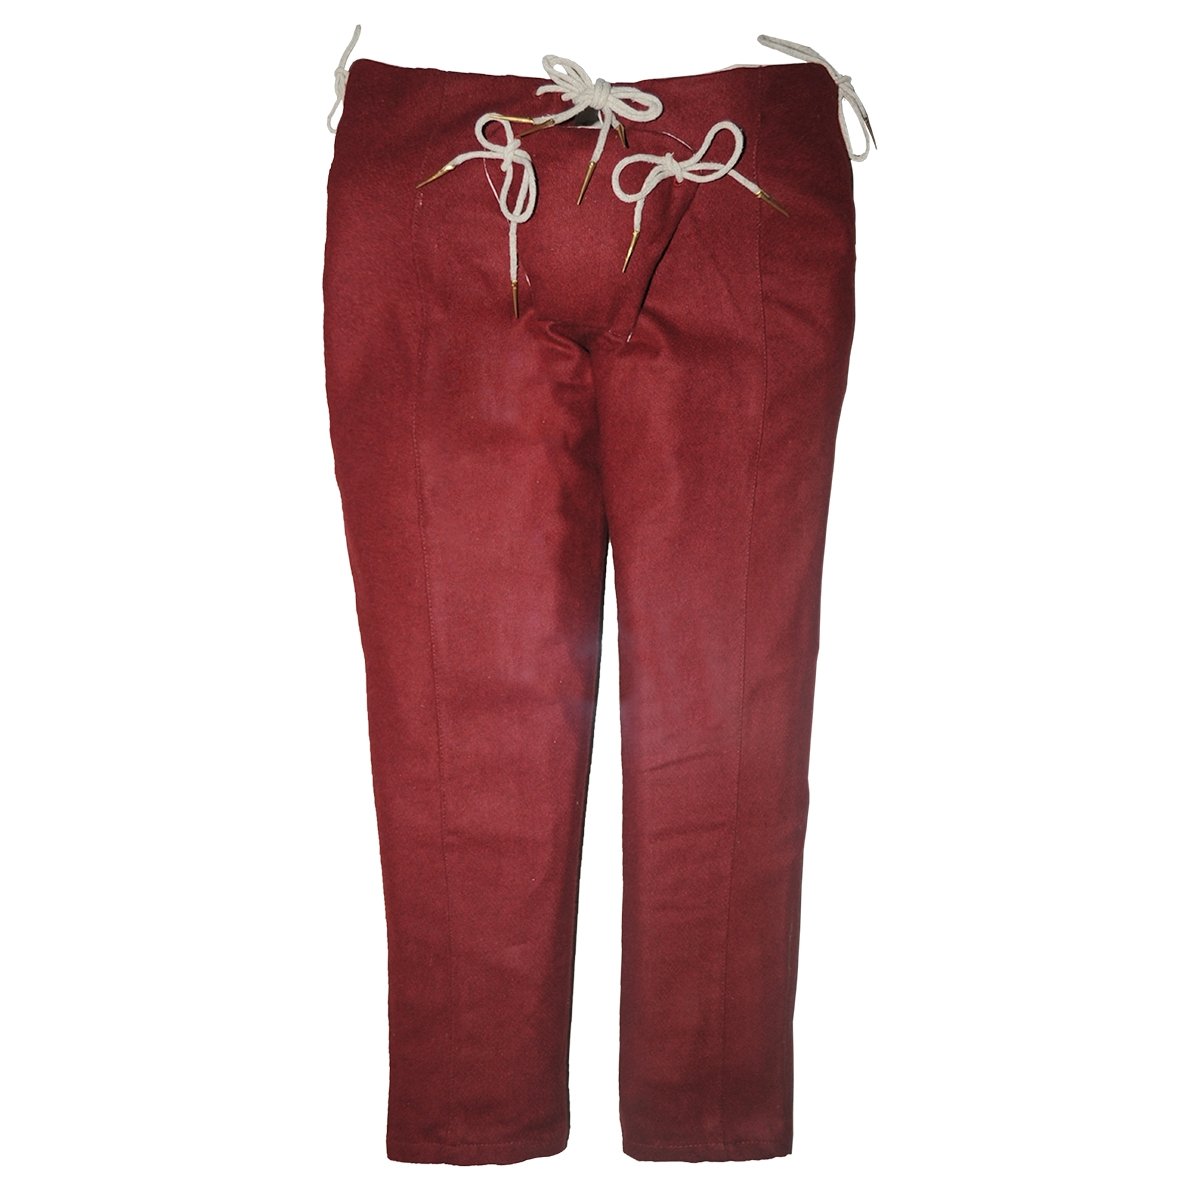 Man's 15th C. Trousers - Maroon, Size L